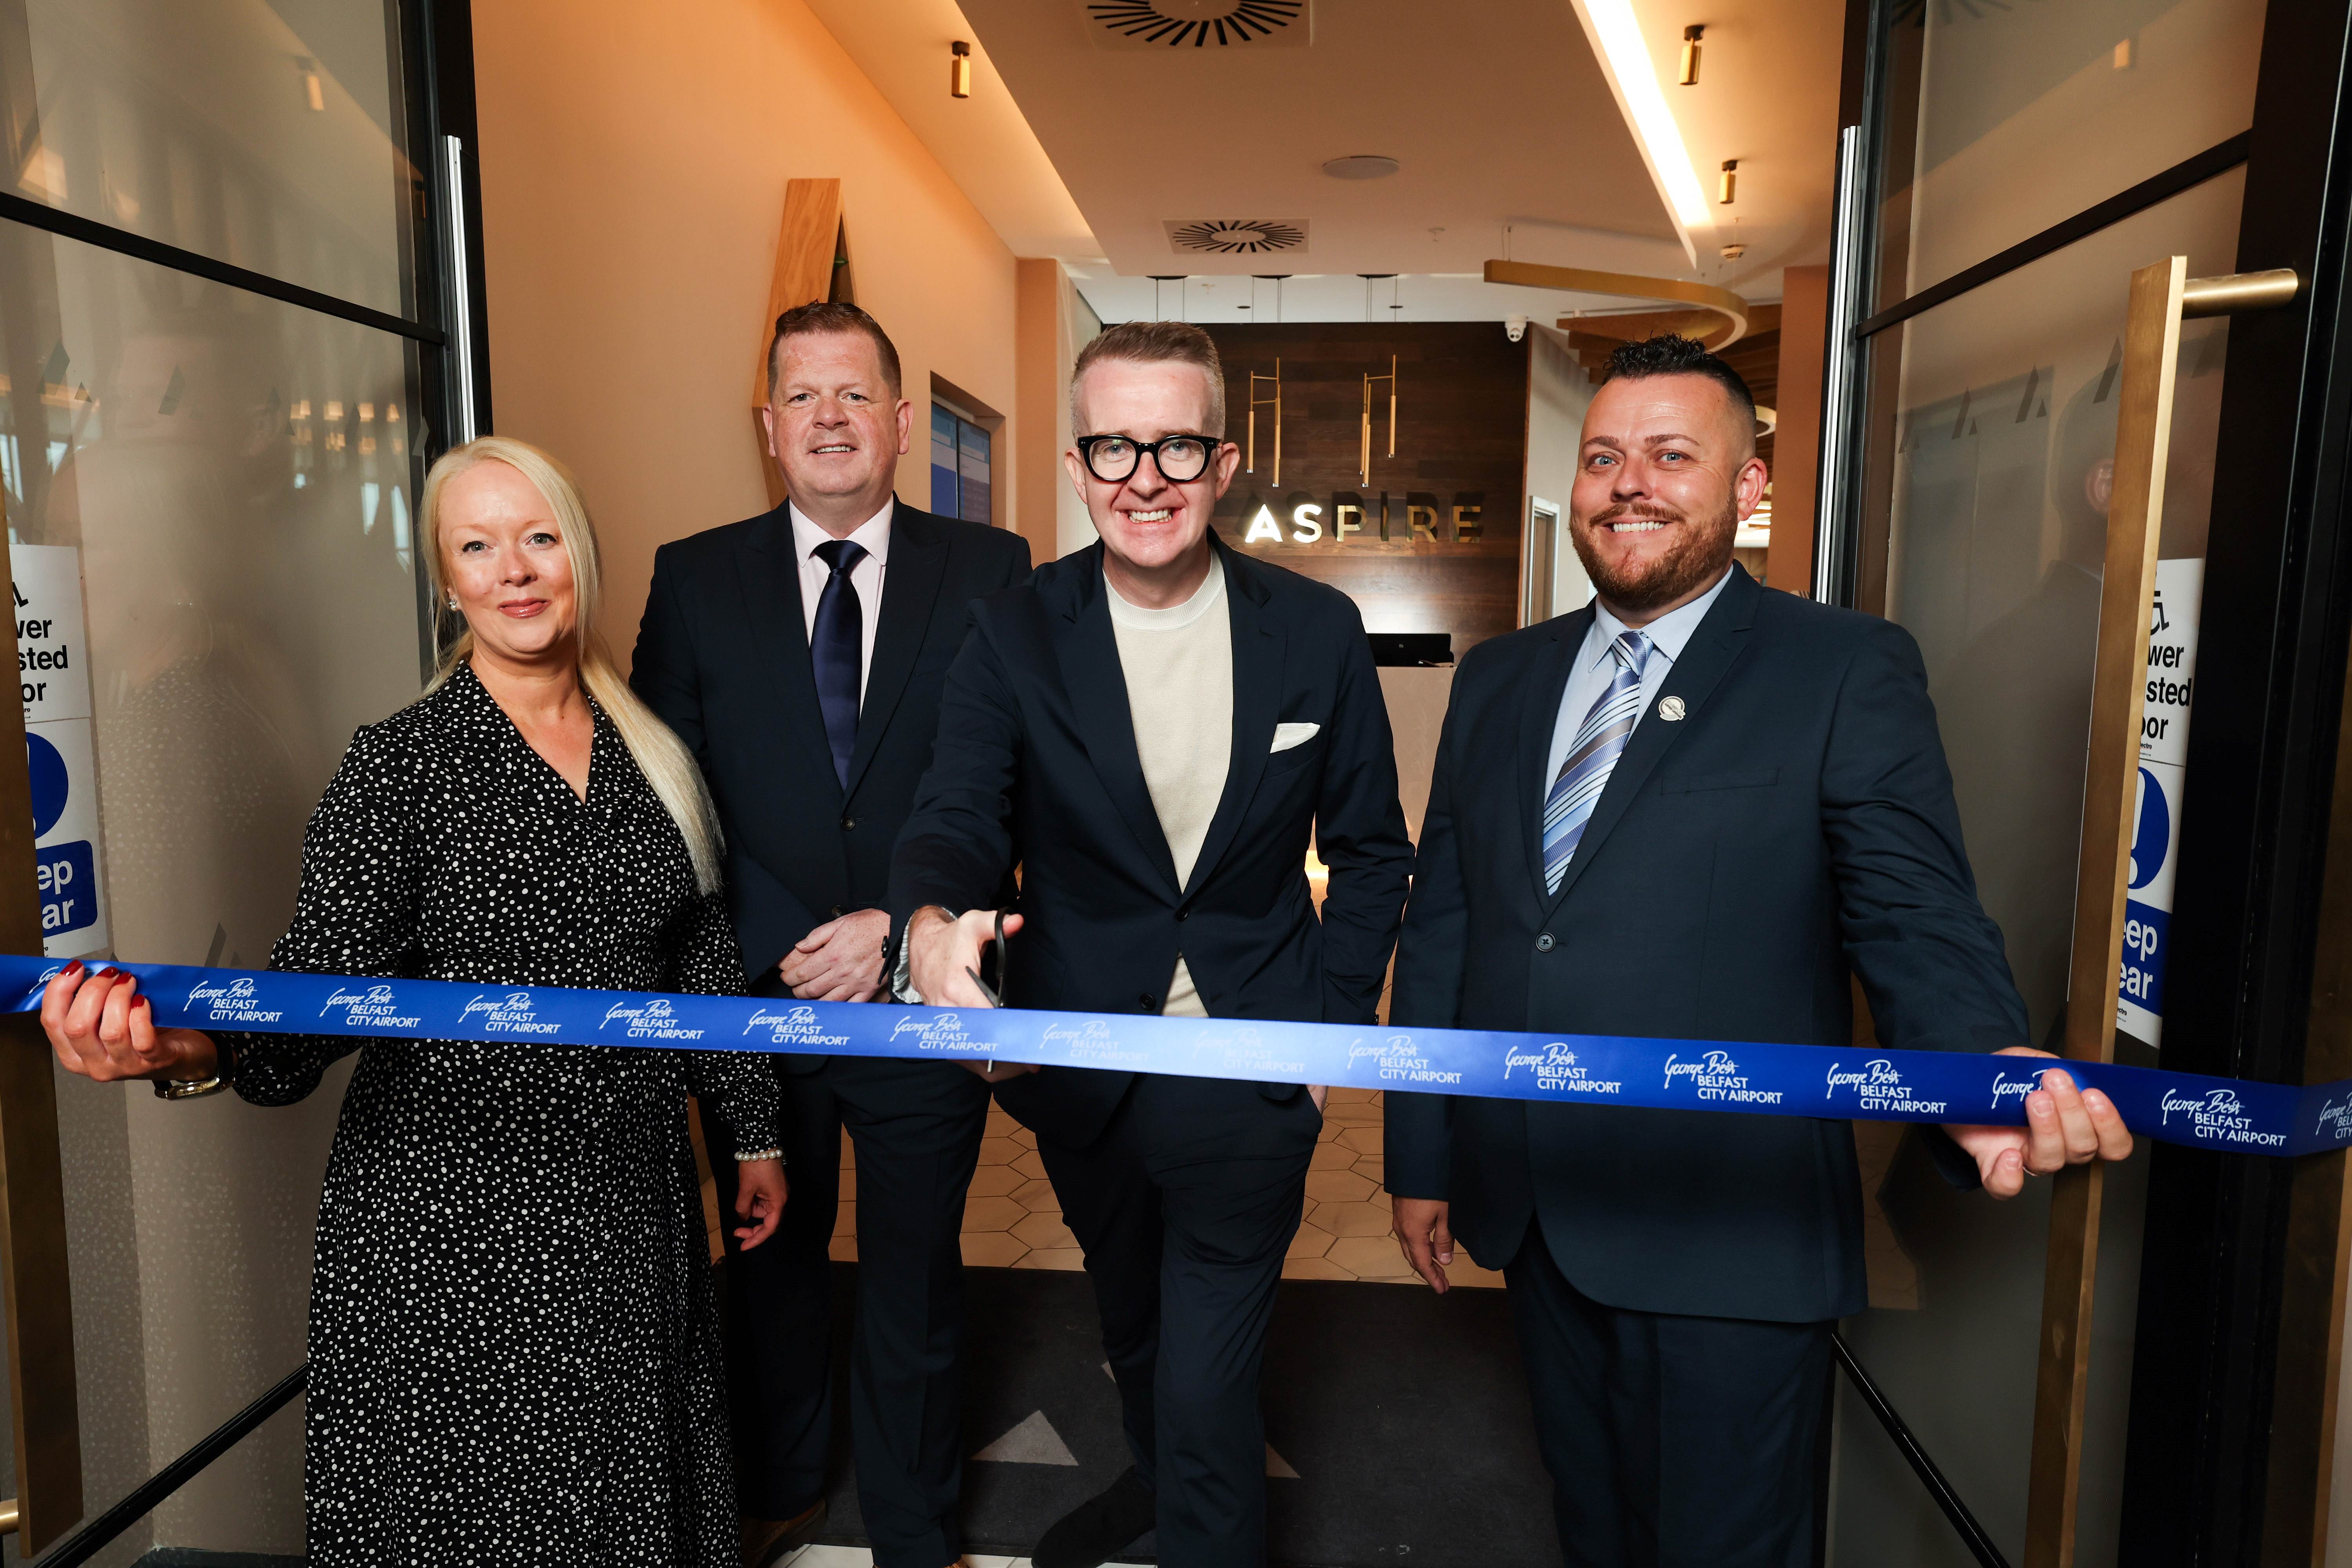 New Aspire Lounge Unveiled at Belfast City Airport